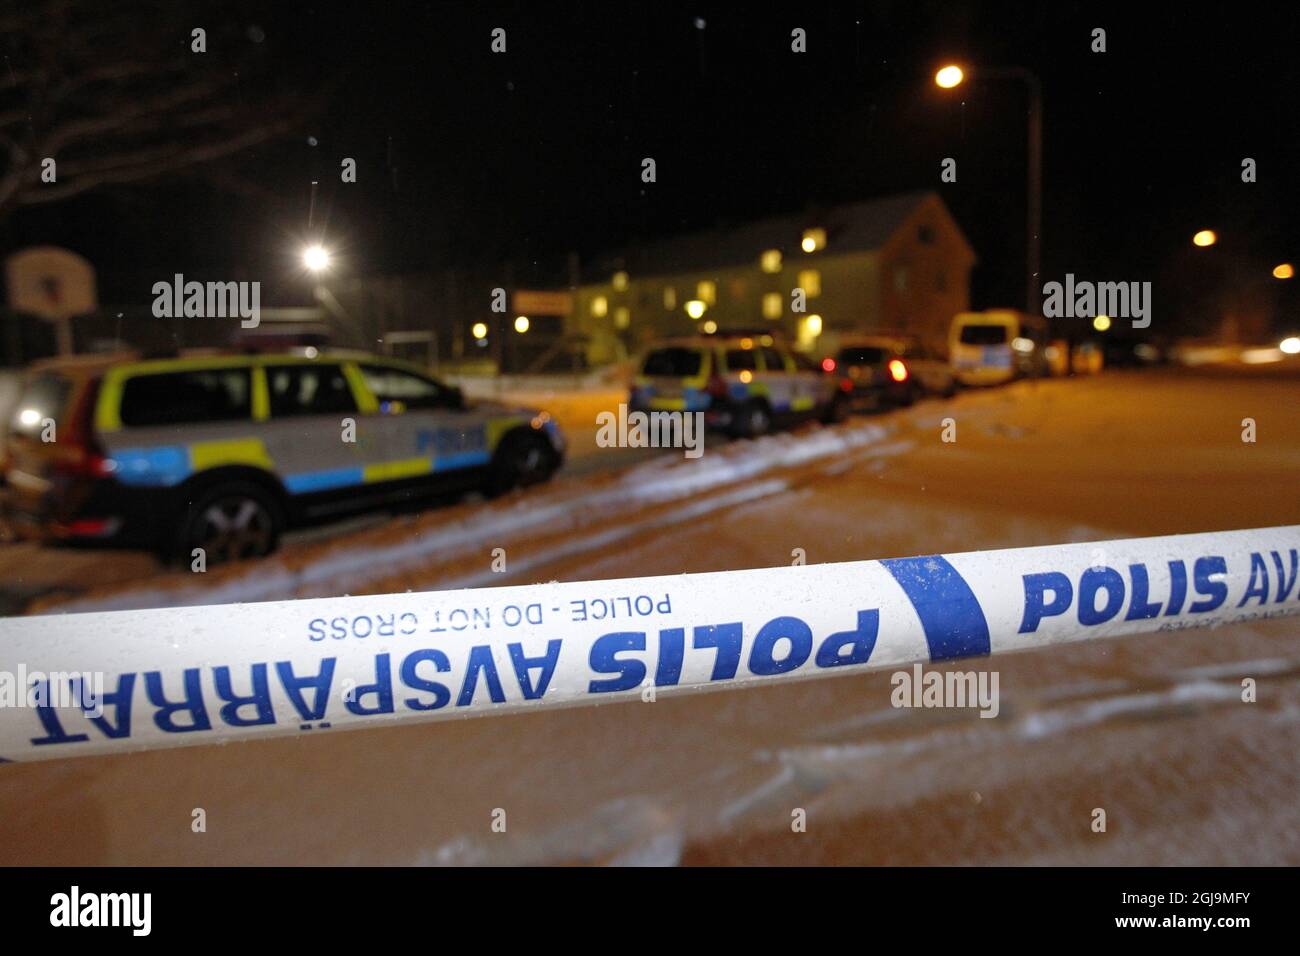 LJUSNE 2016-02-13 Police have roped off an asylum center in Ljusne in northern Sweden February 13, 2016 after a deadly stabbing. One person was killed in the stabbing and three sent to hospital with unknown injuries. Photo: Pernilla Wahlman / TT / kod: 9203  Stock Photo